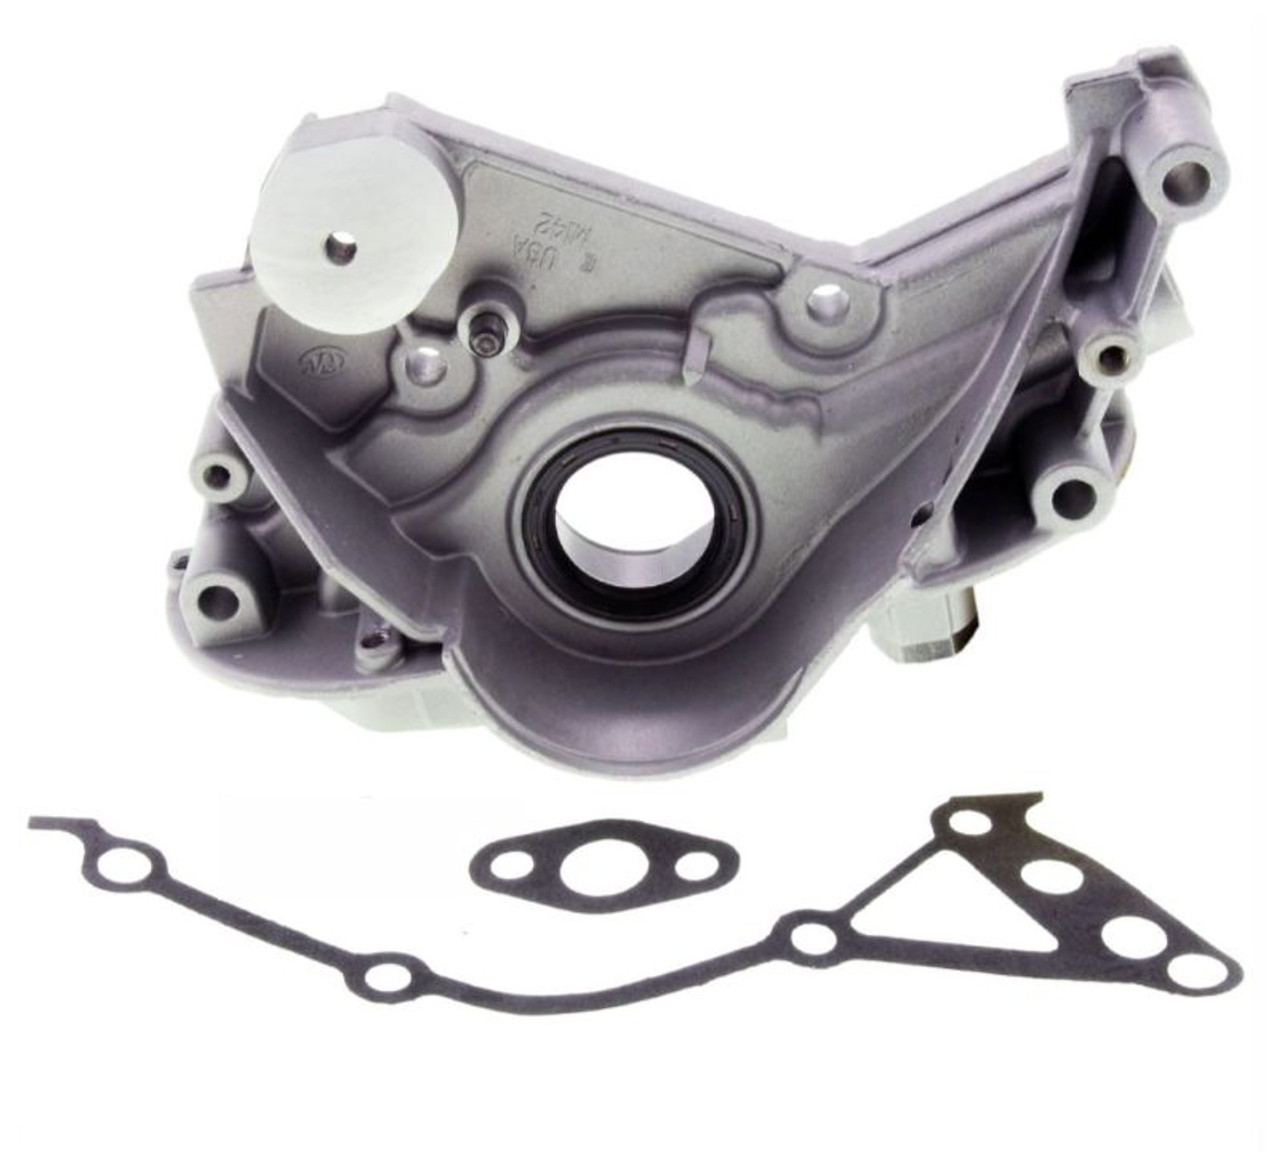 Oil Pump - 1996 Plymouth Grand Voyager 3.0L (EP142.H79)